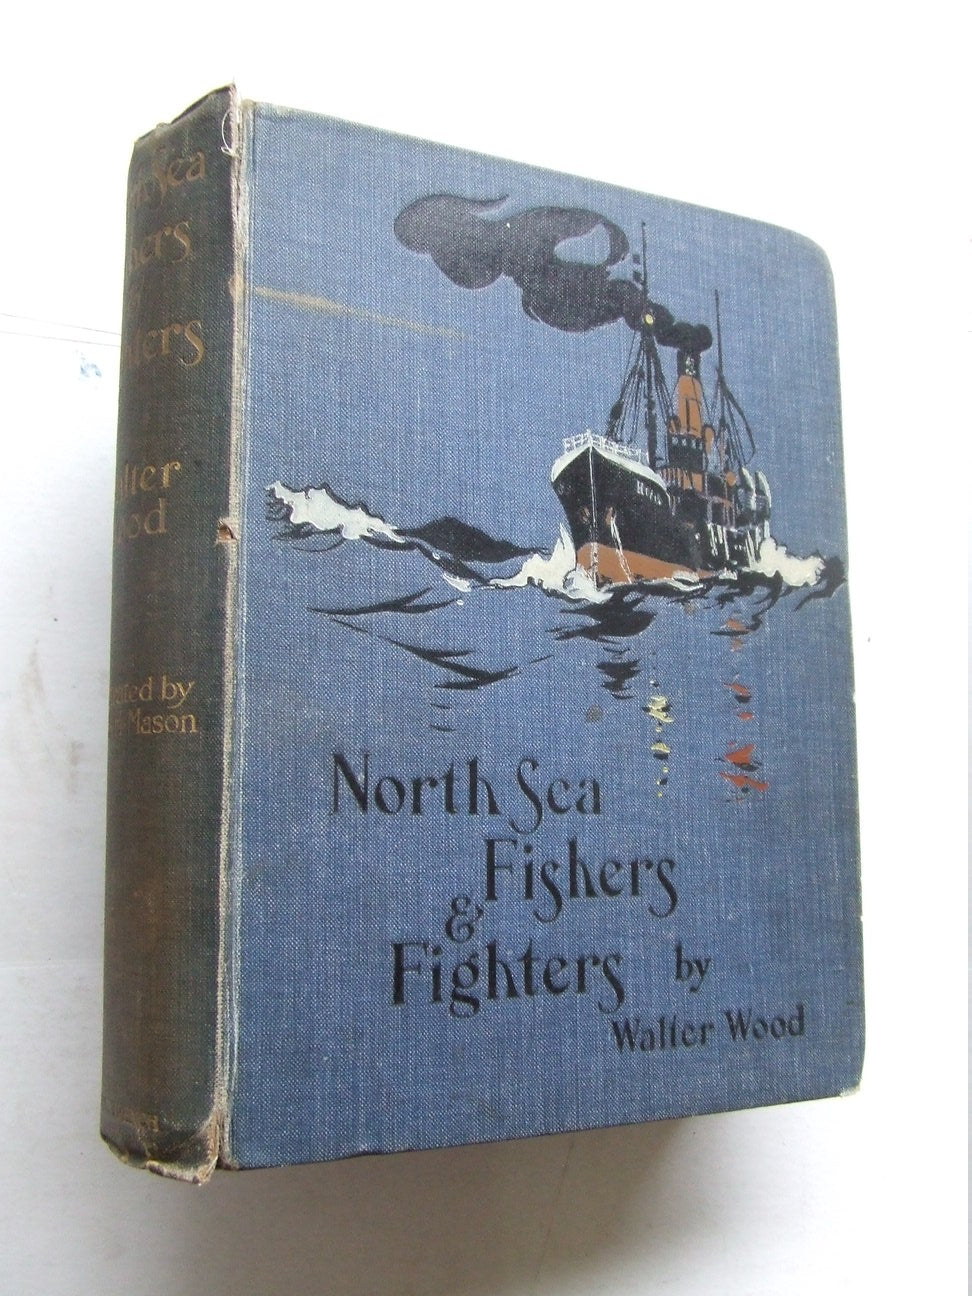 North Sea Fishers & Fighters